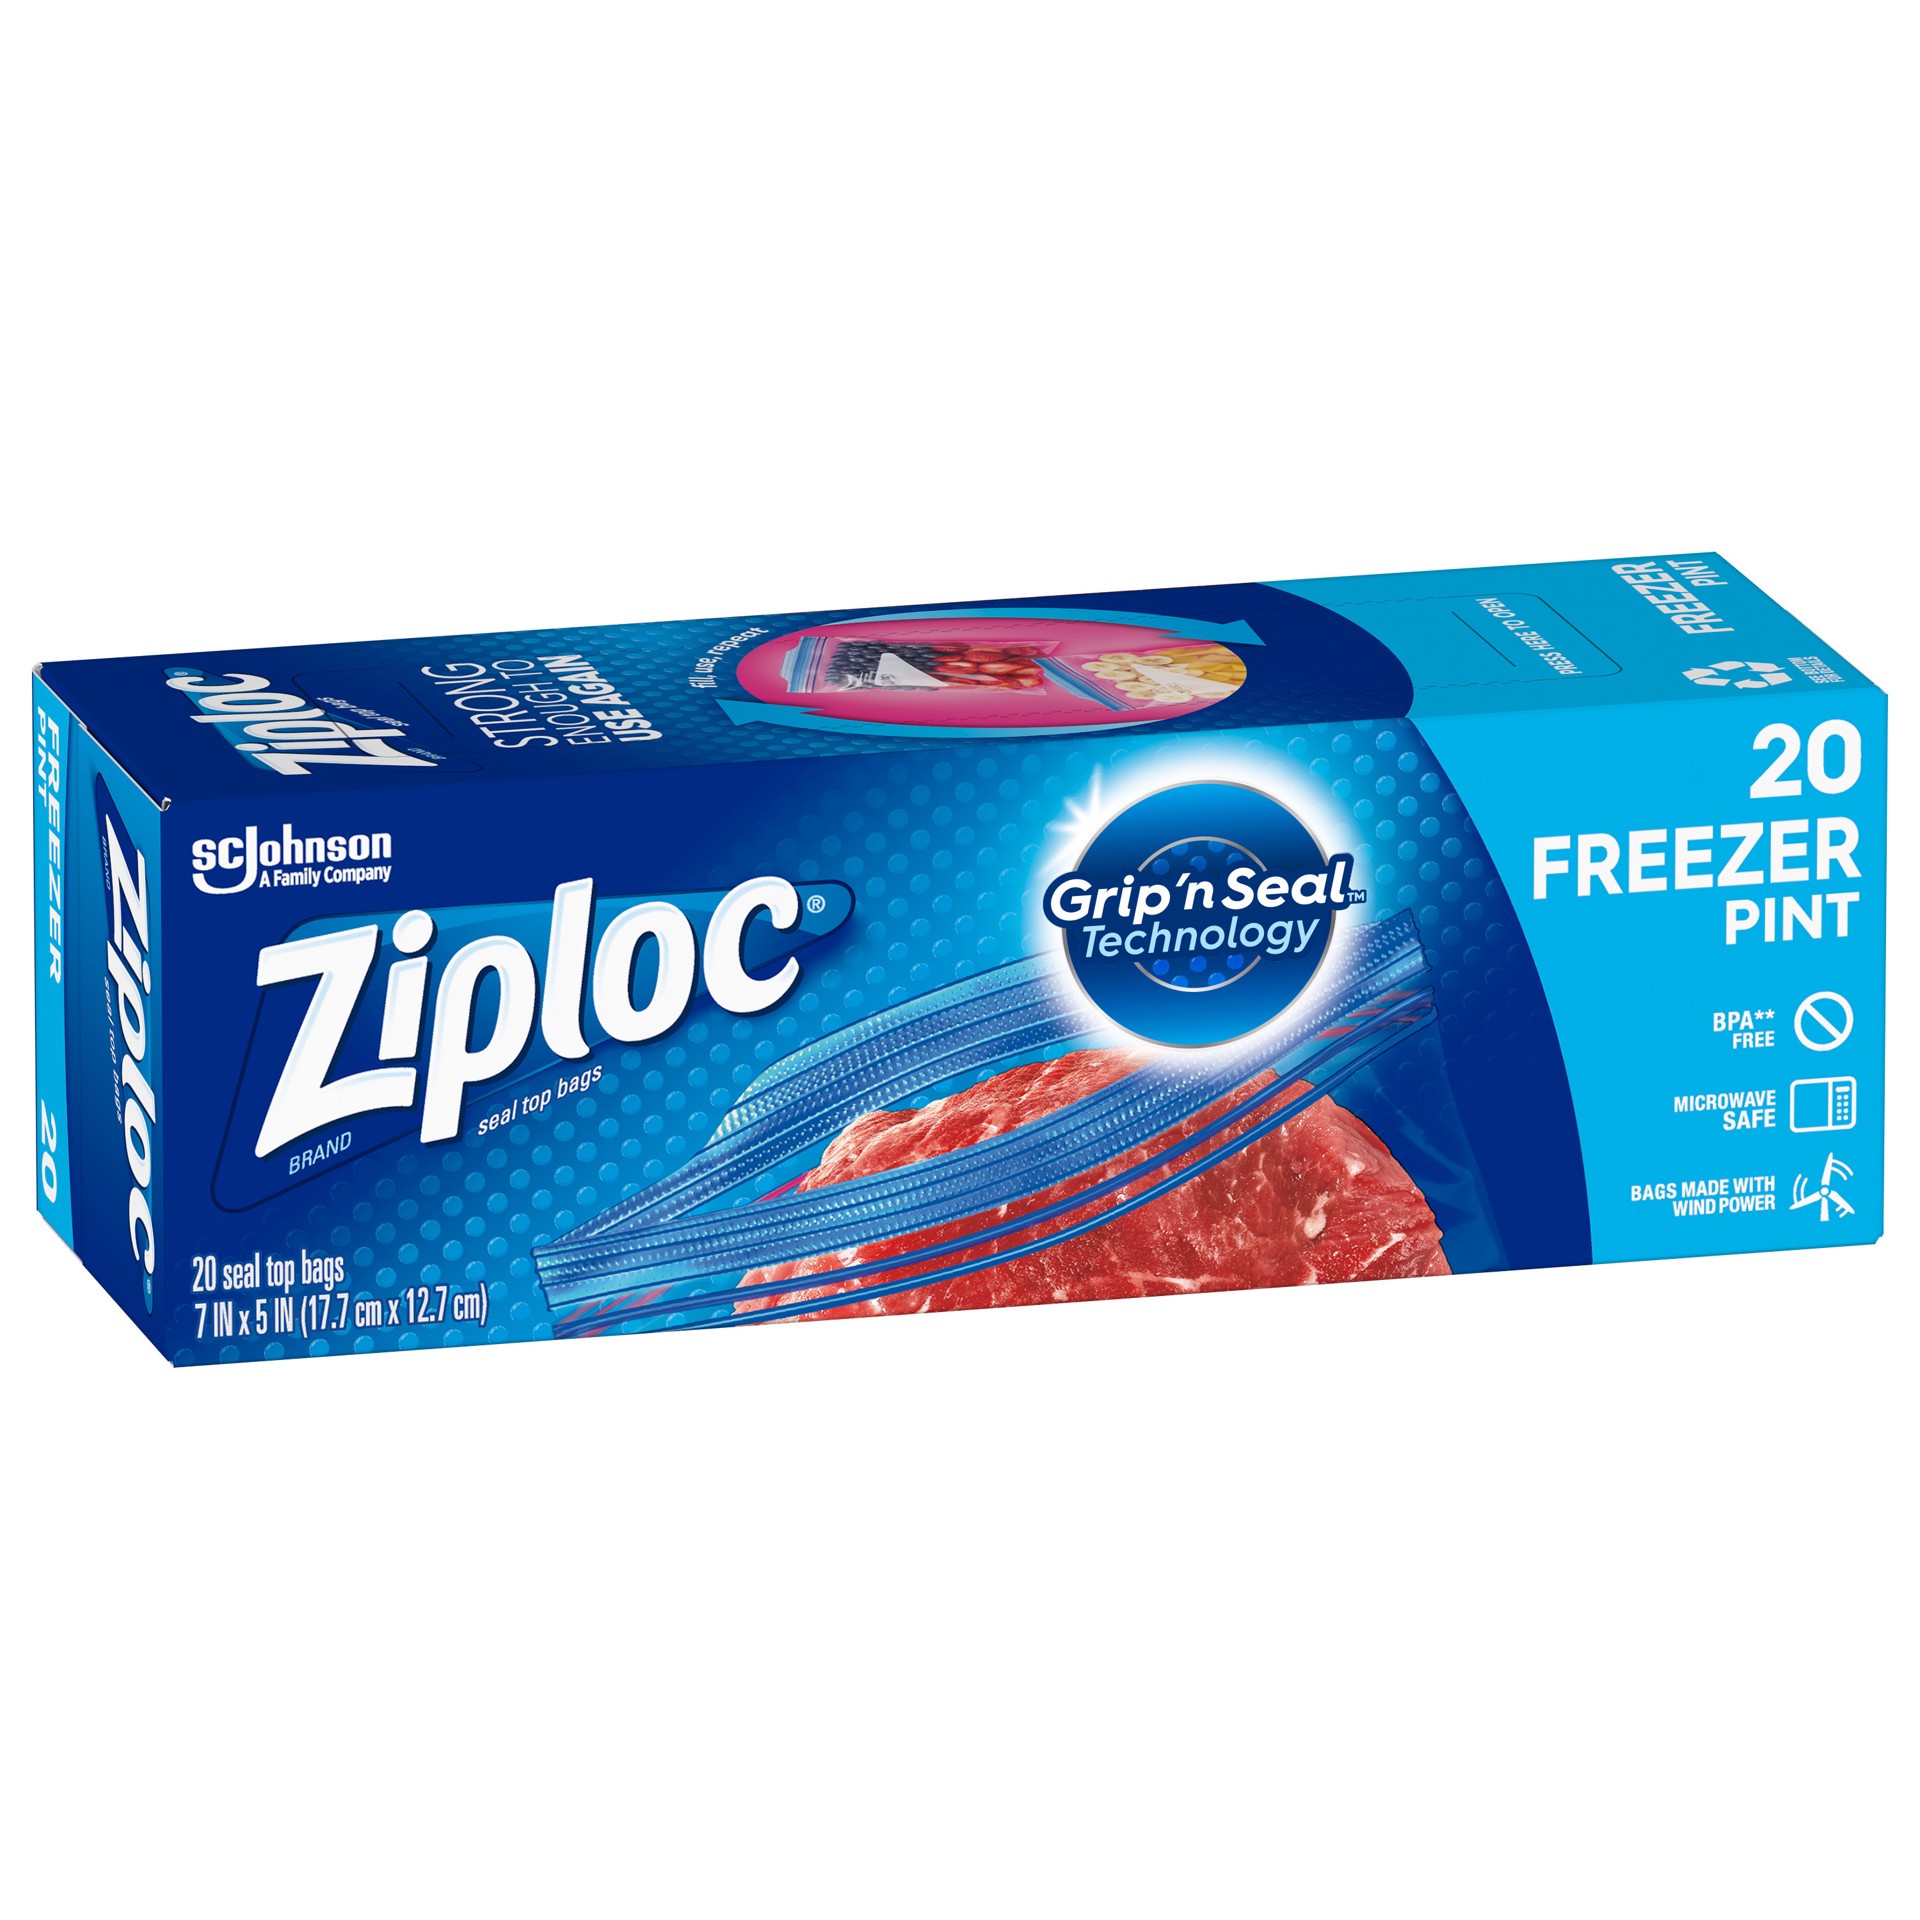 slide 4 of 5, Ziploc Brand Freezer Bags with Grip 'n Seal Technology, Pint, 20 Count, 20 ct